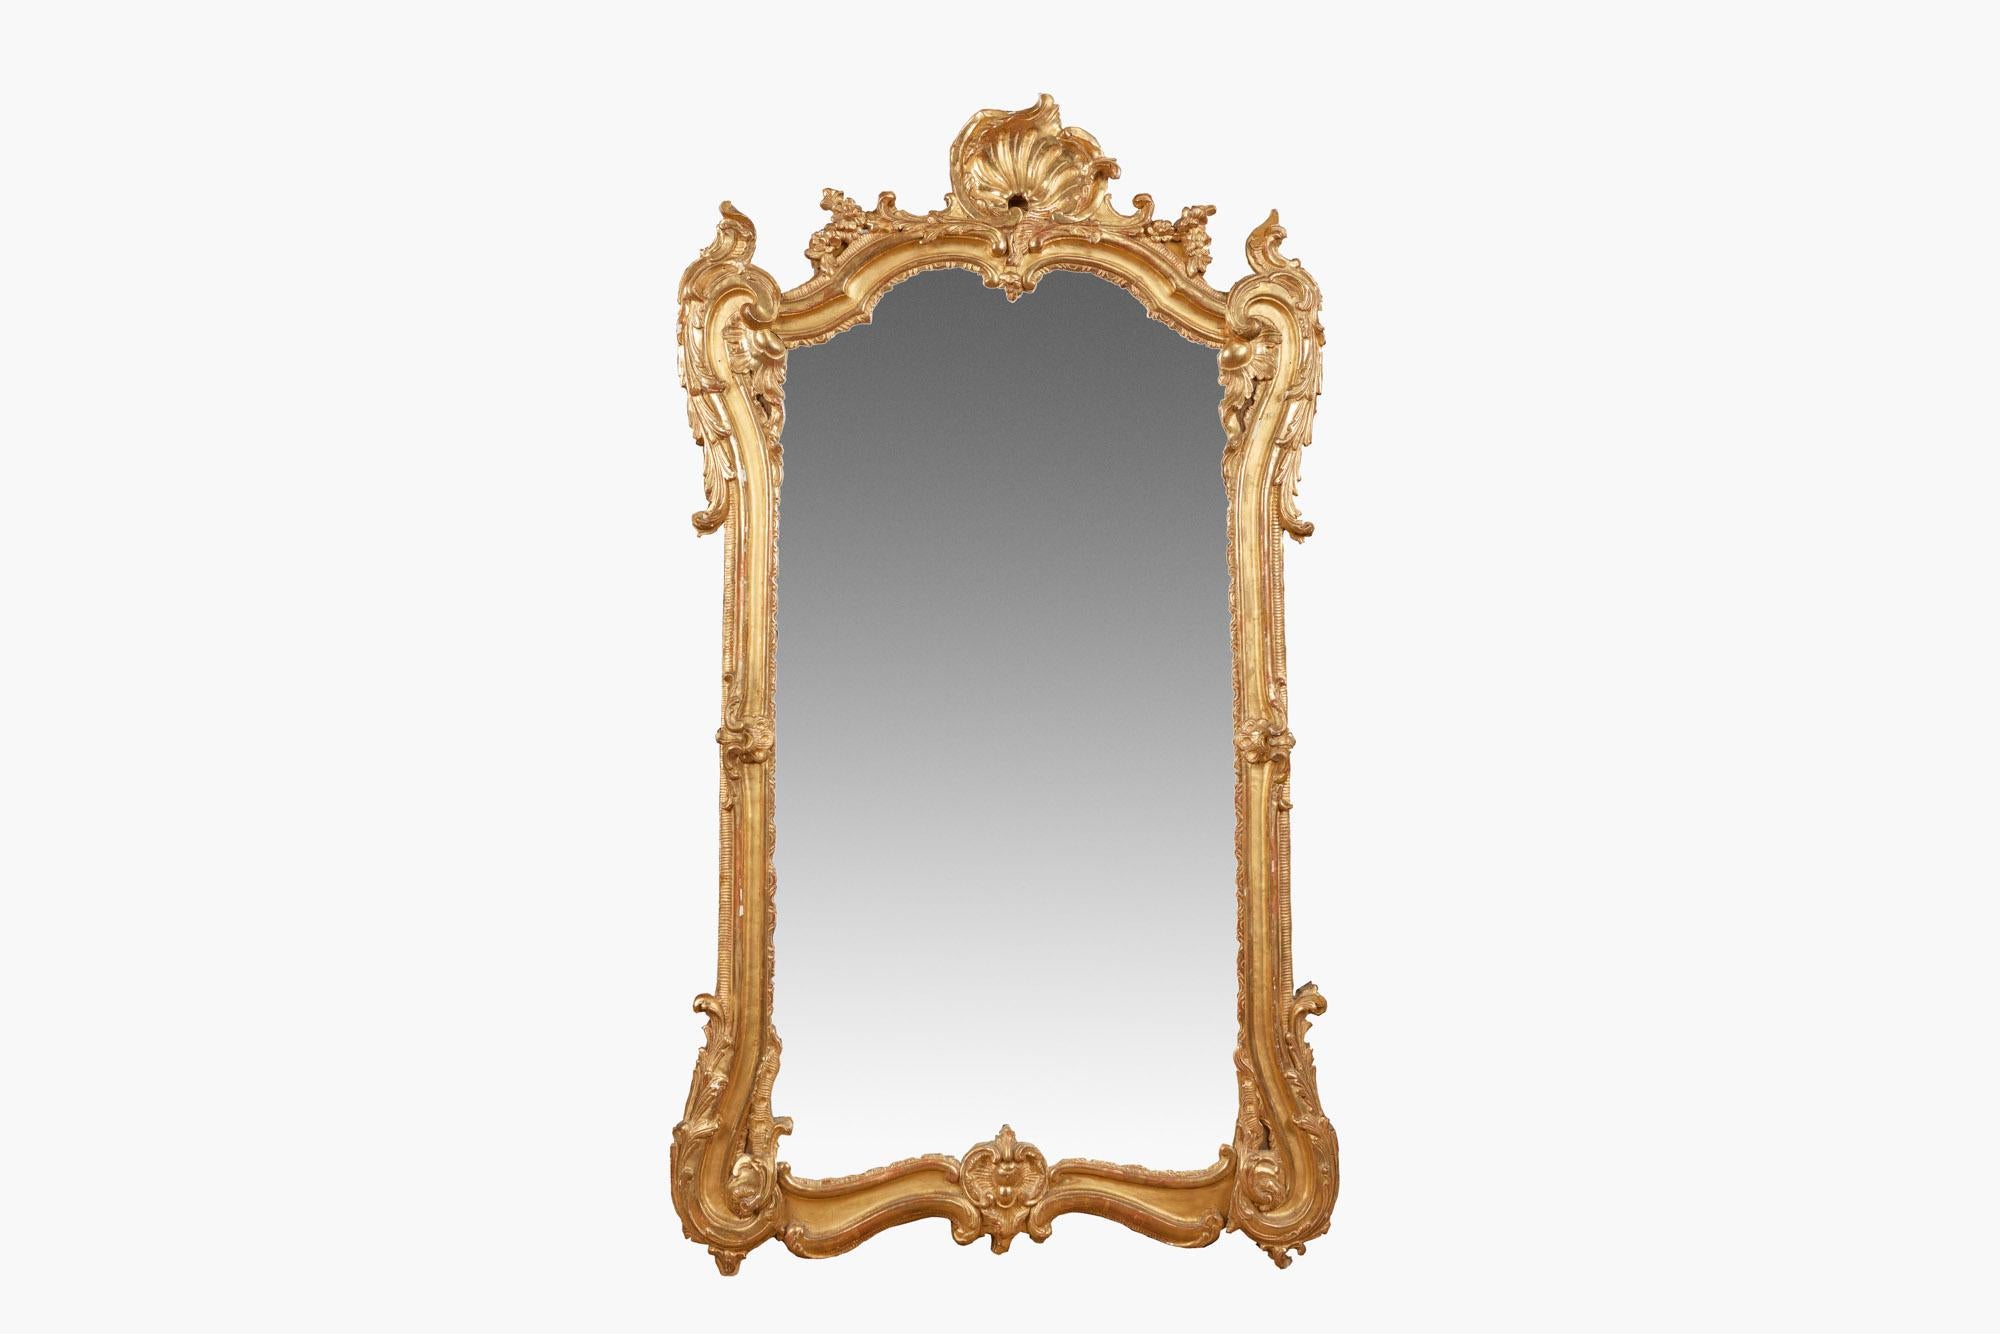 18th century Georgian giltwood pier mirror, the mirror plate set within shaped pierced frame with ruffles, scrolling foliate, acanthus leaf, flower head and S and C scrolls surmounted with scallop shell.